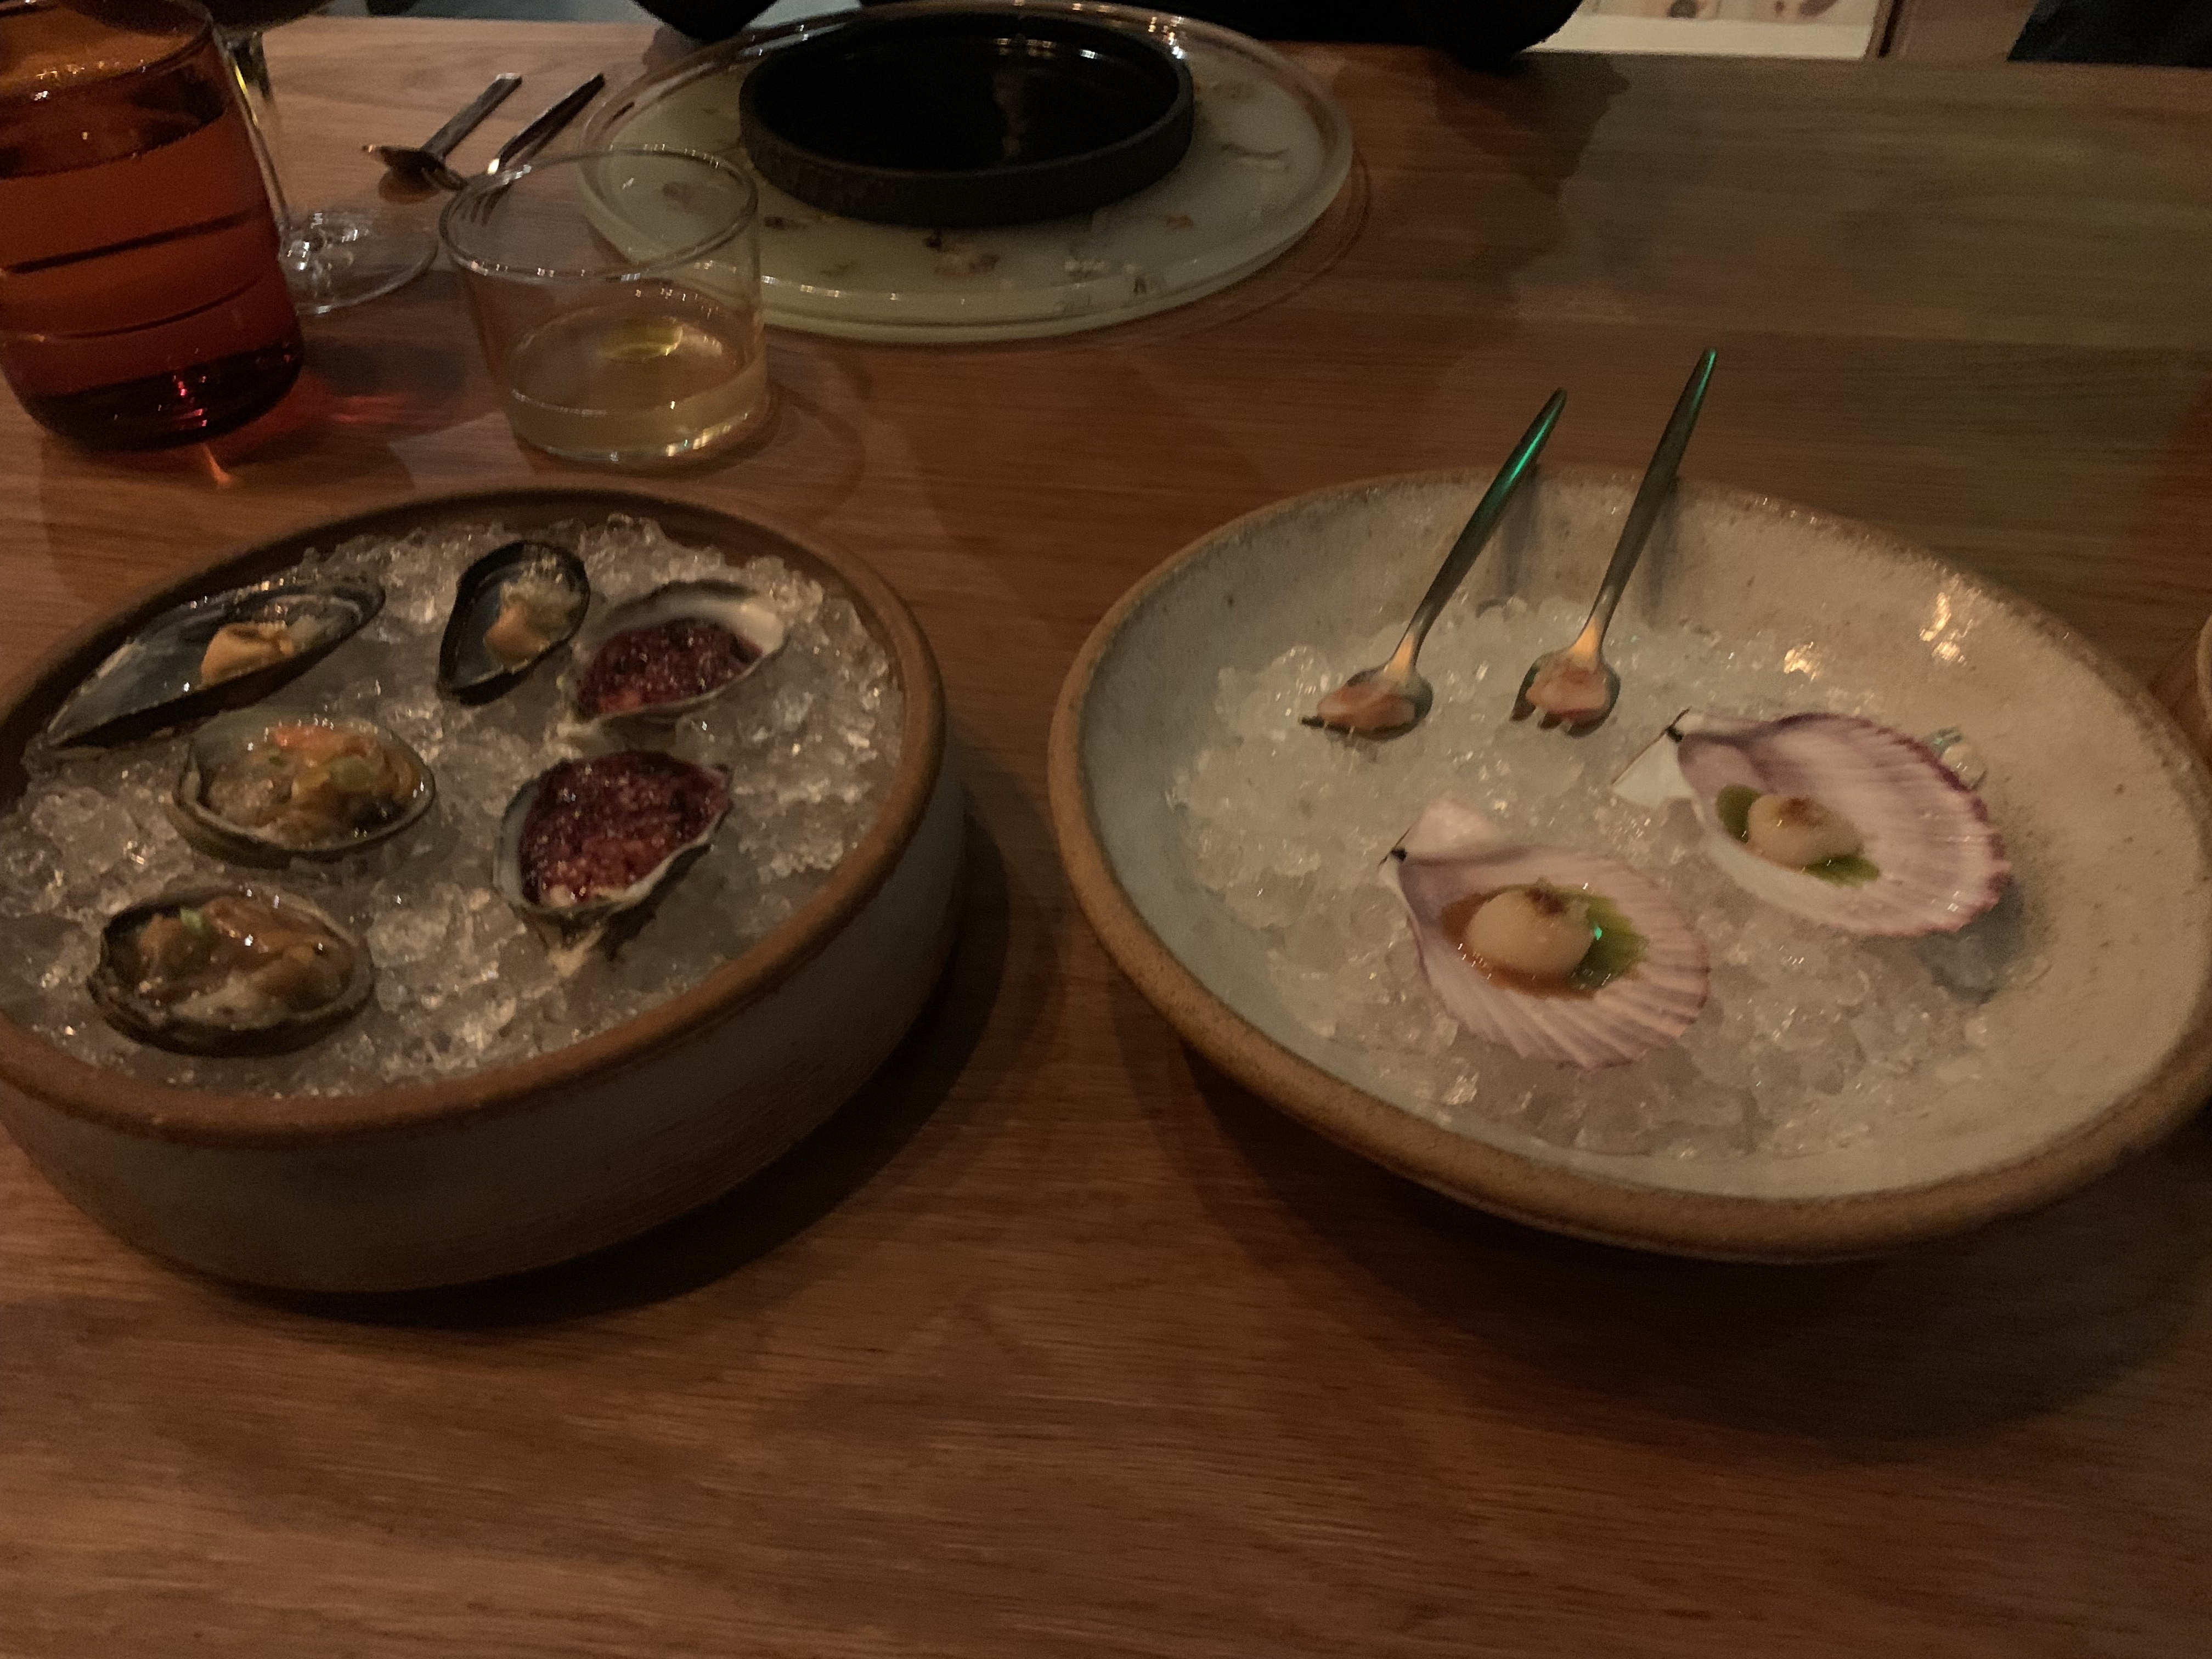 Two plates with various shellfish: mussles, clams, and oysters